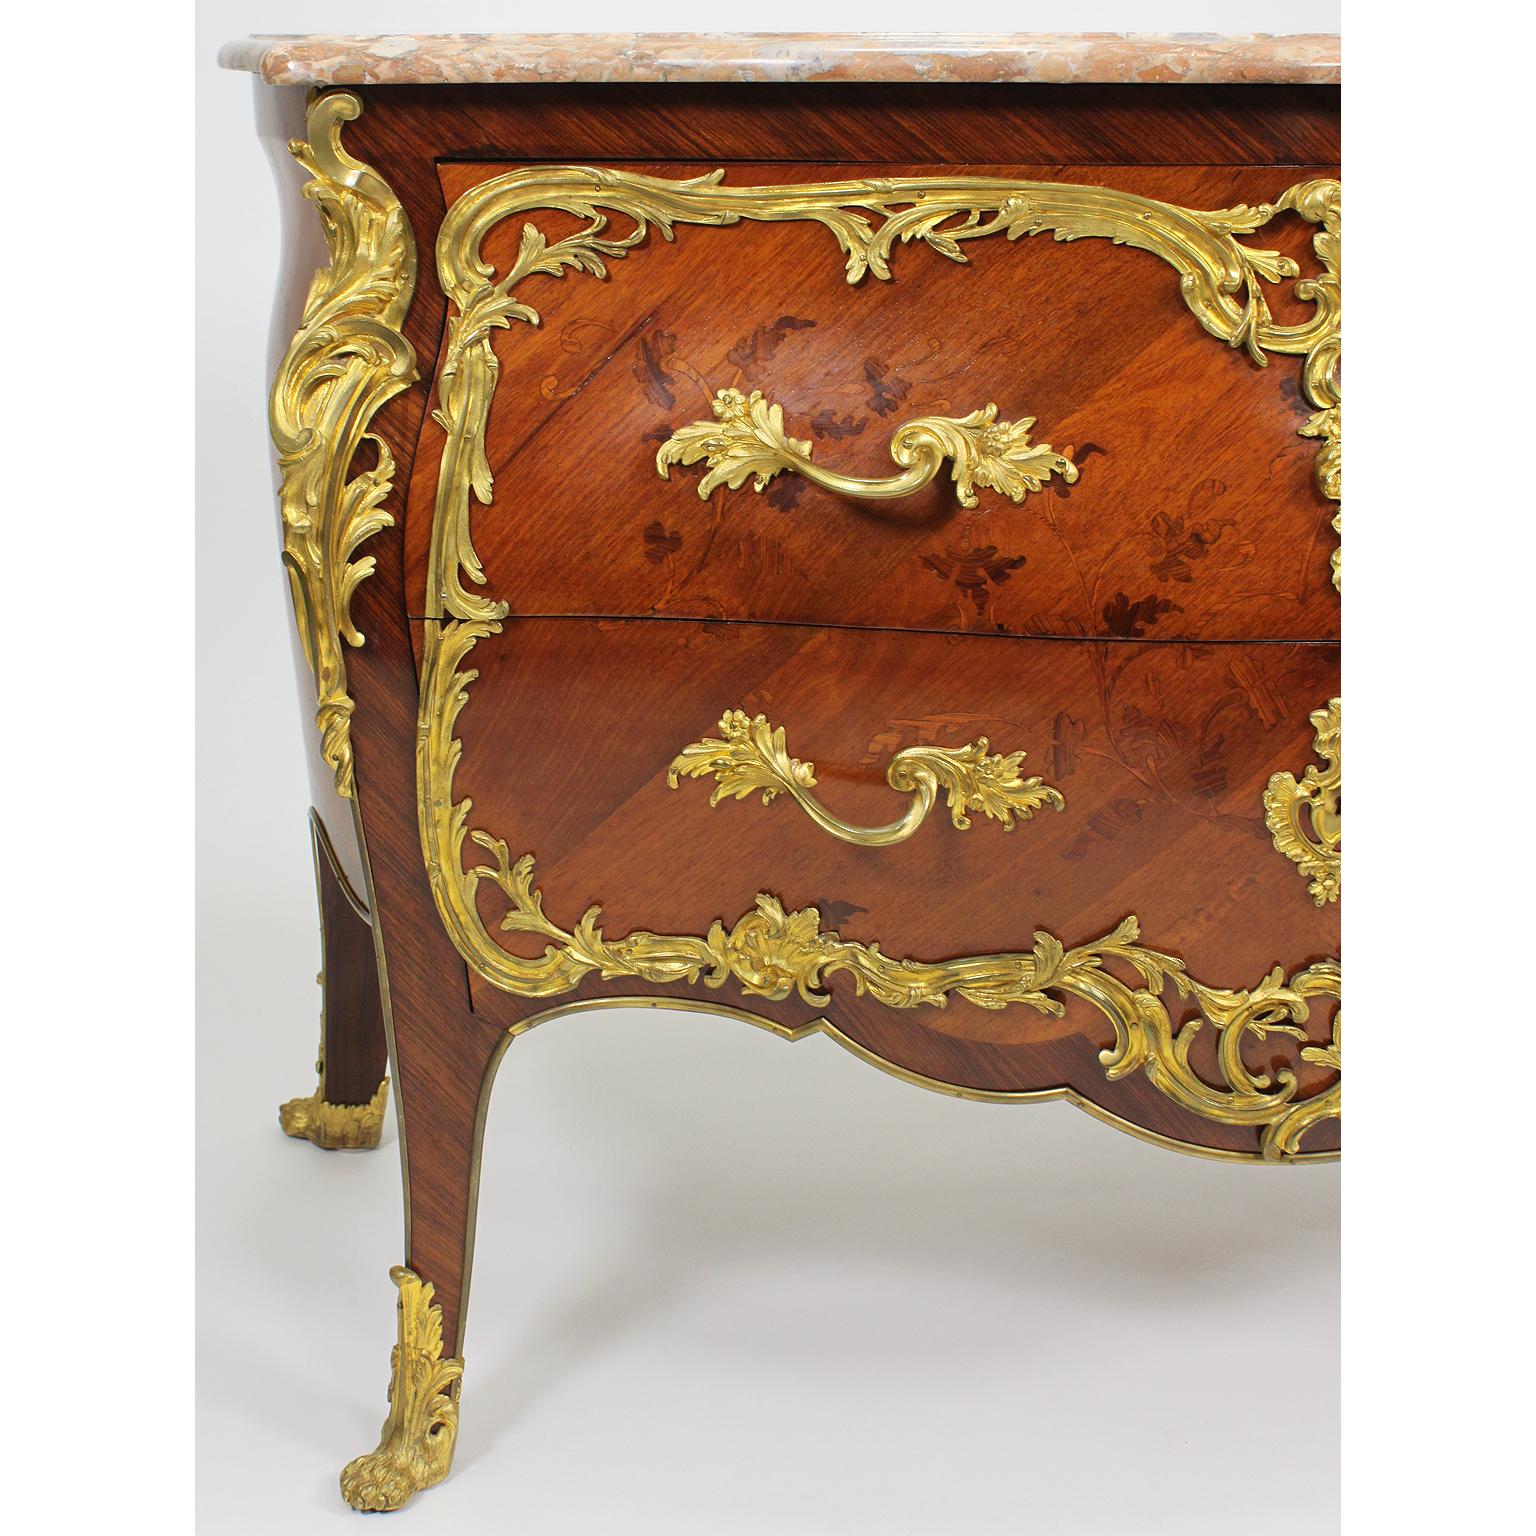 Veneer French 19th-20th Century Louis XV Style Gilt-Bronze Mounted Marquetry Commode For Sale